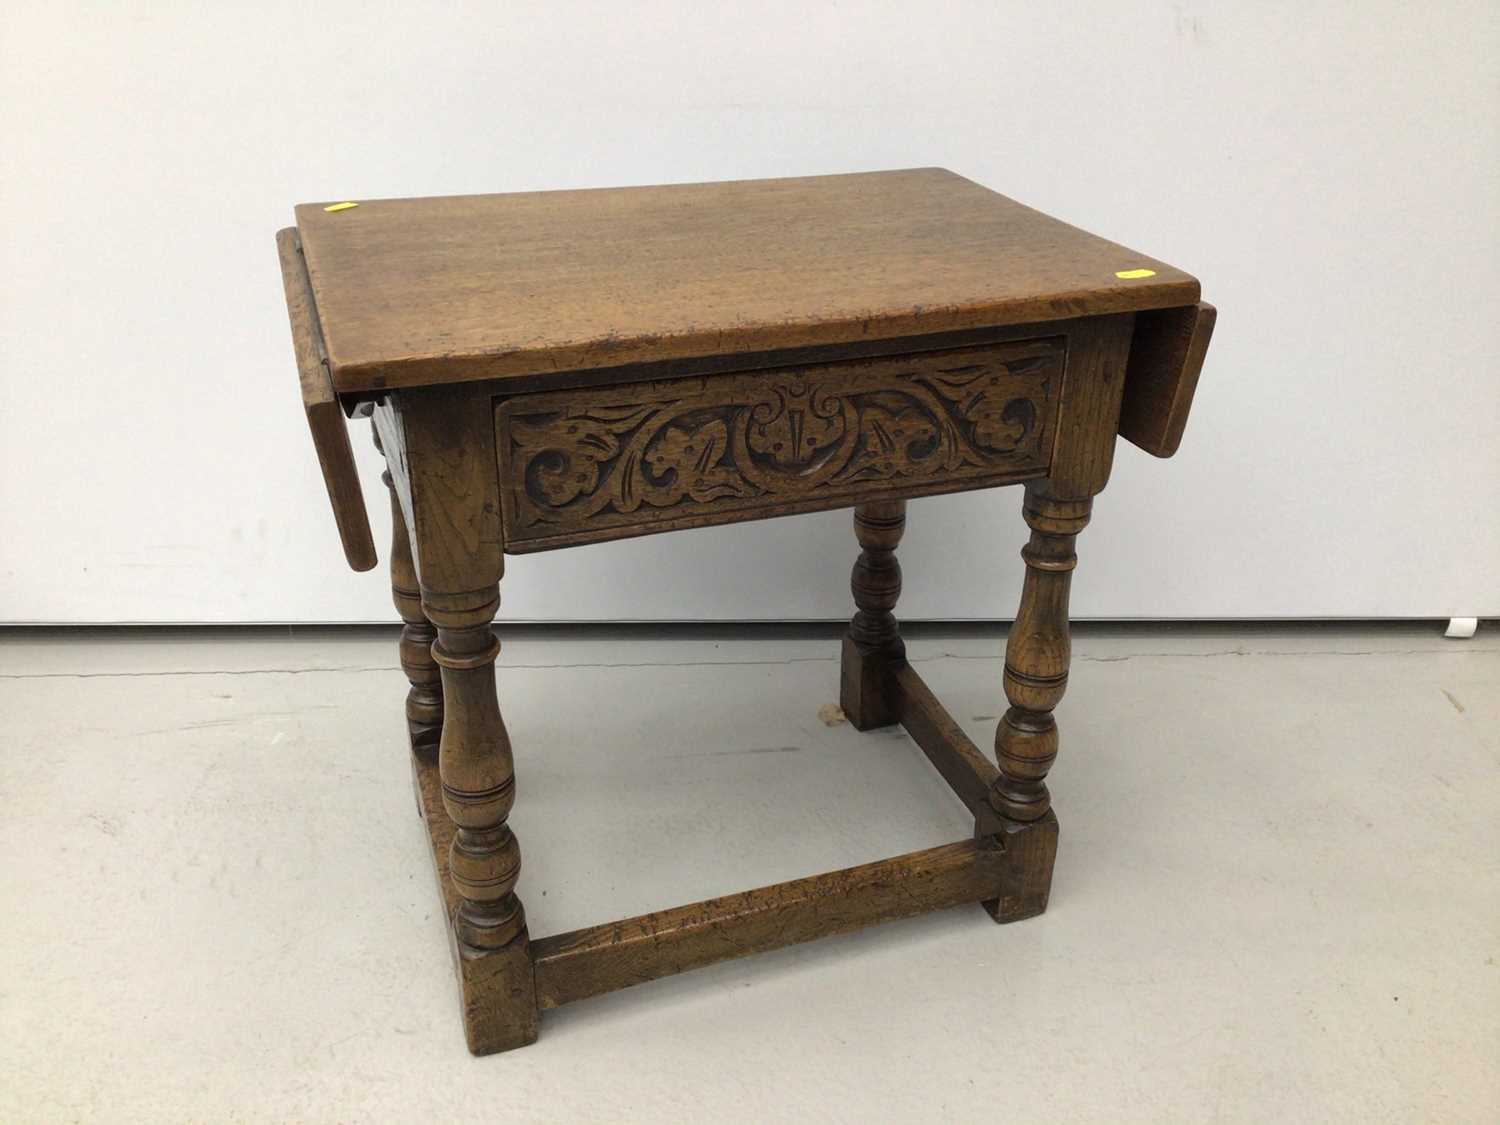 Lot 2 - Good quality 17ty century style carved oak drop leaf side table 51cm wide